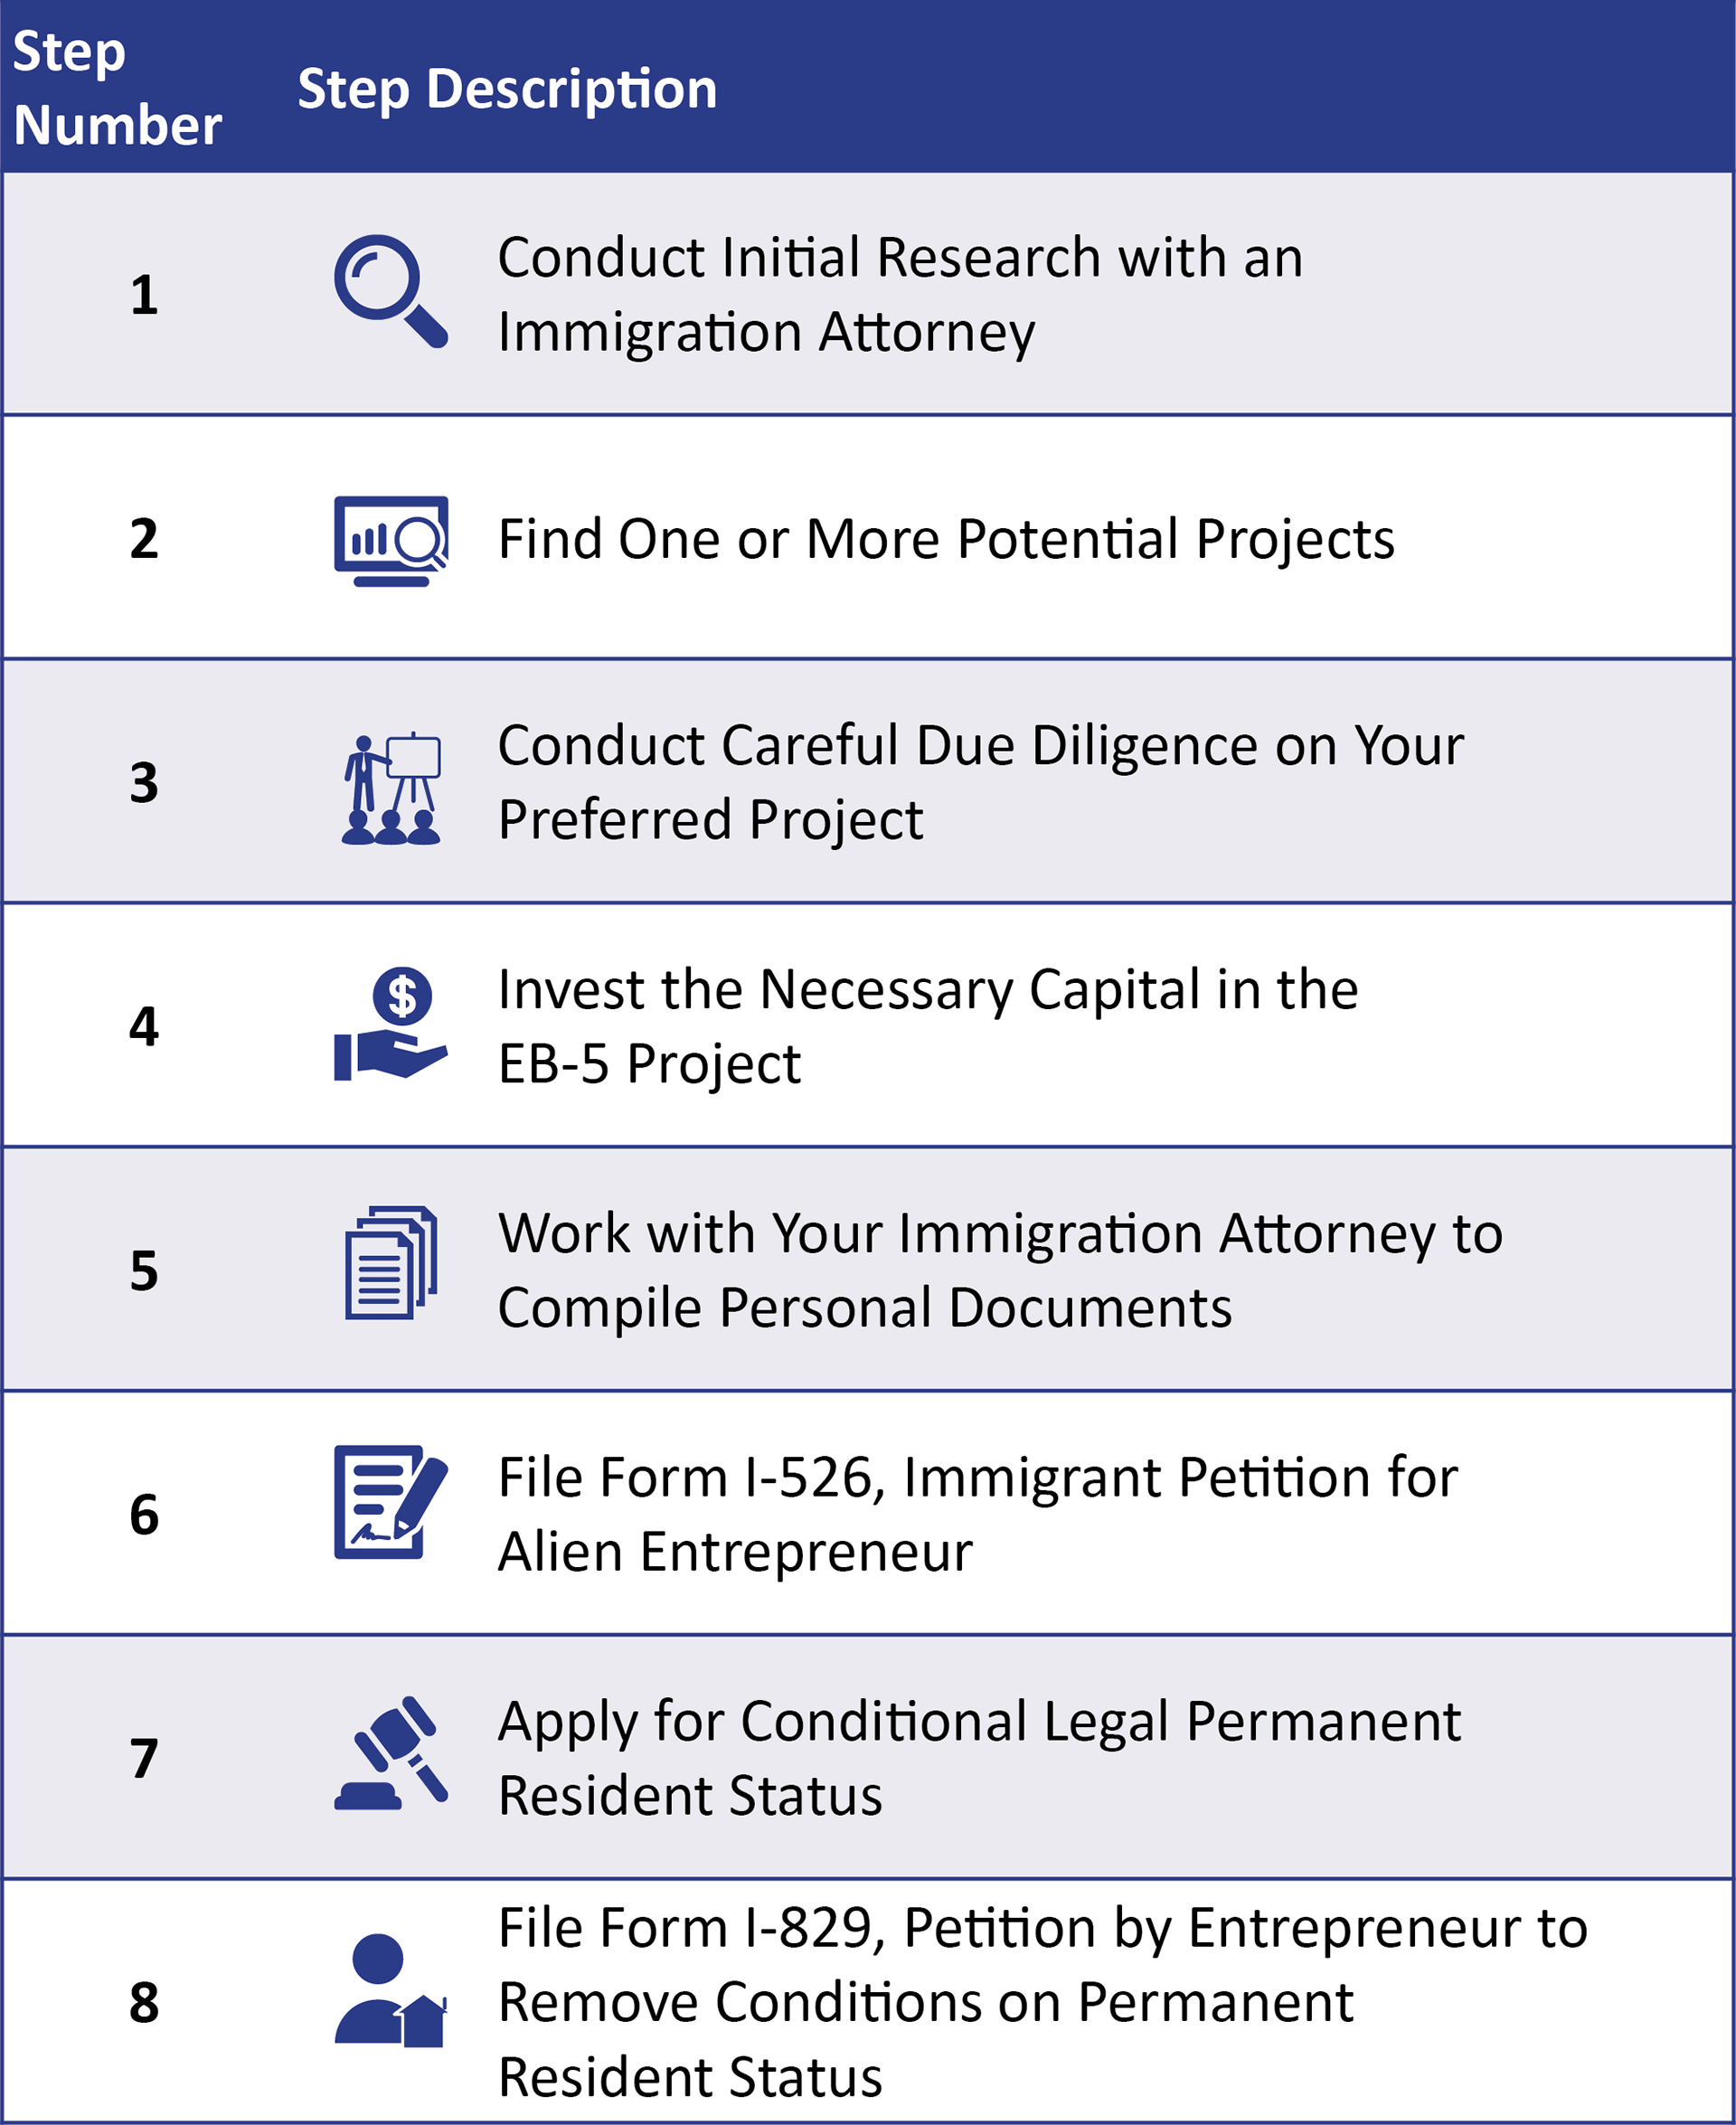 Chart showing the EB-5 process in 8 steps starting with conducting initial research and ending with filing Form 1-829.